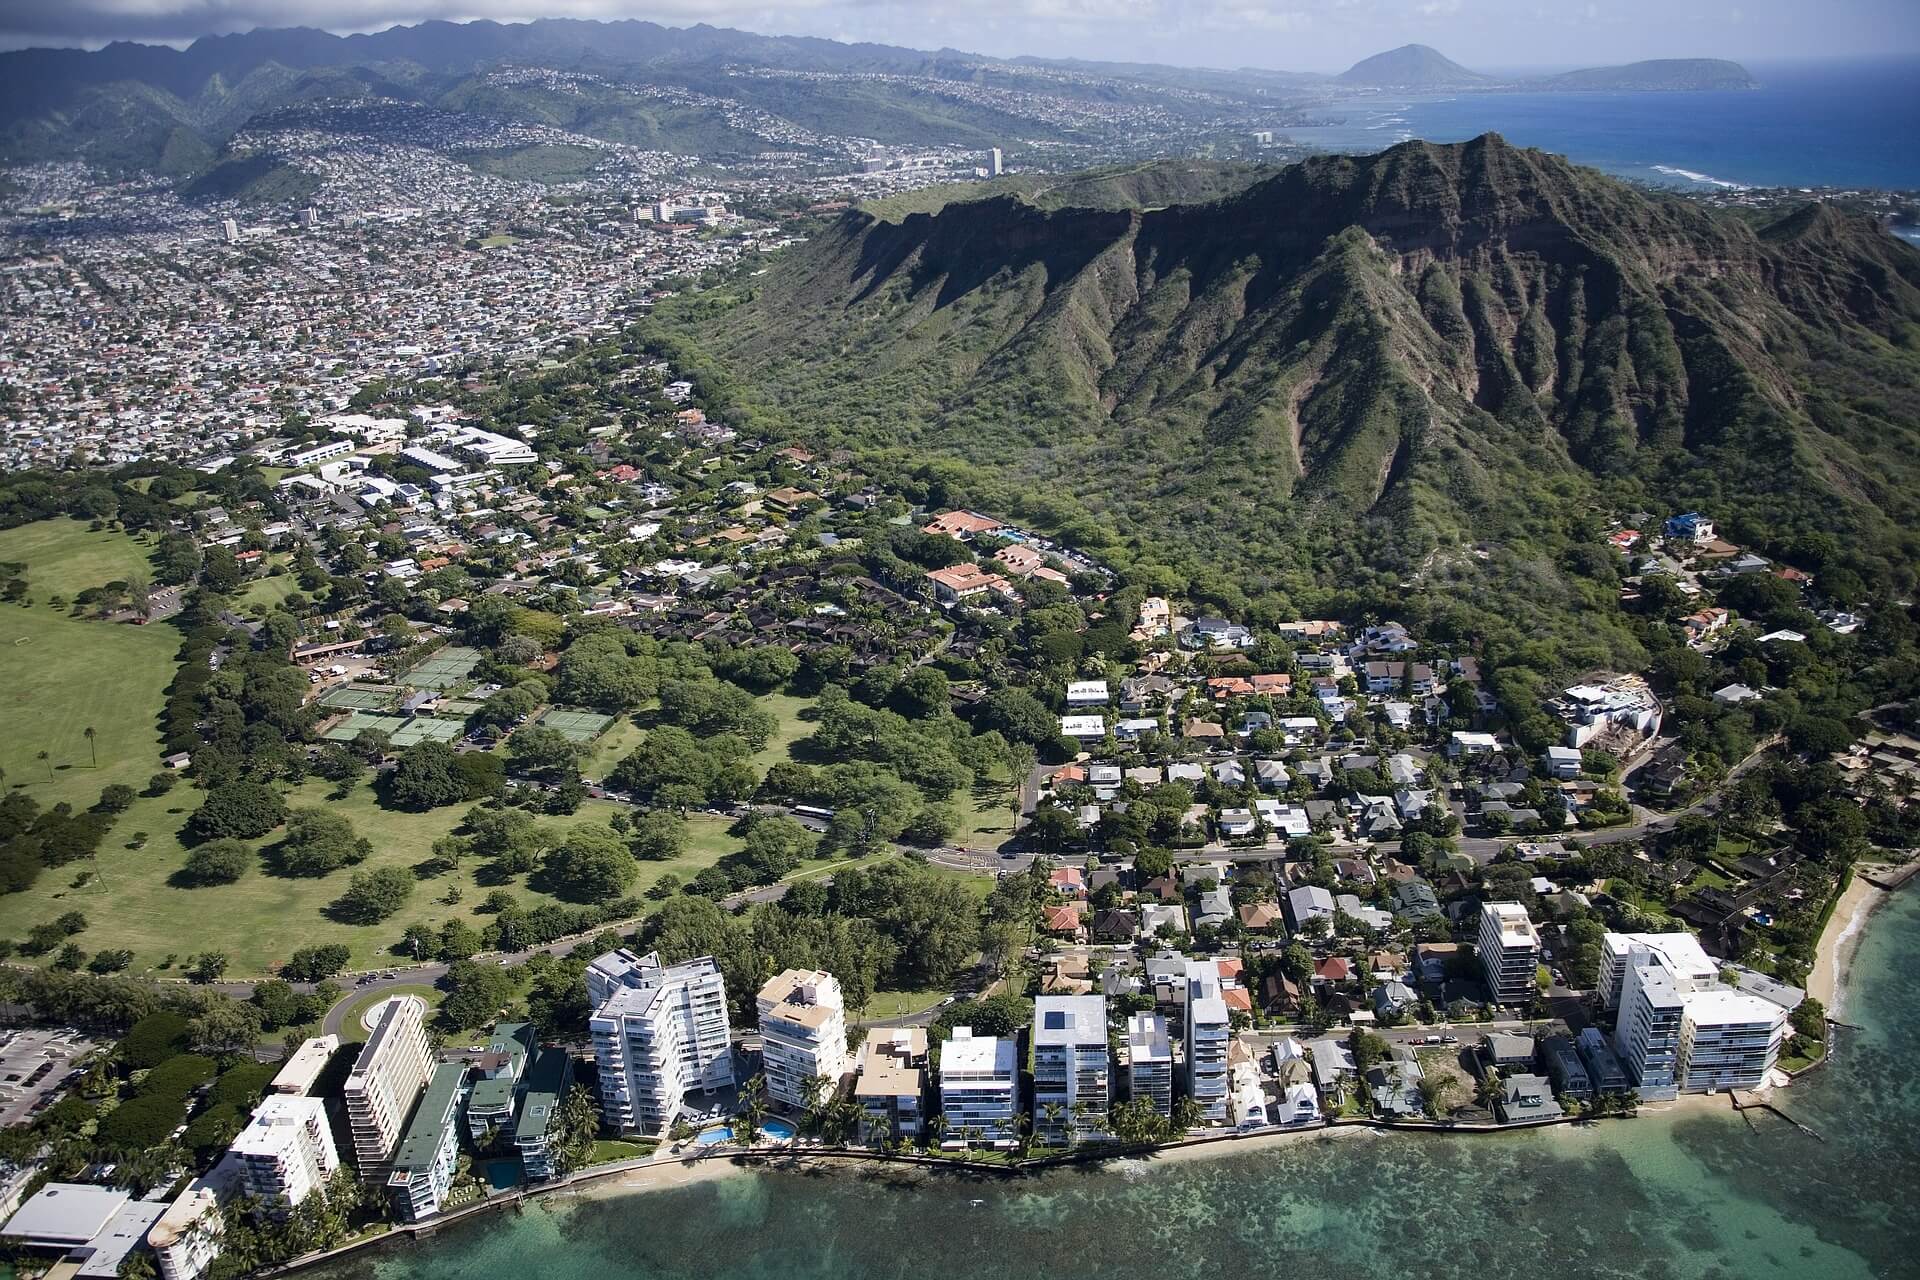 Doing one of the best things to do in Waikiki - koko head